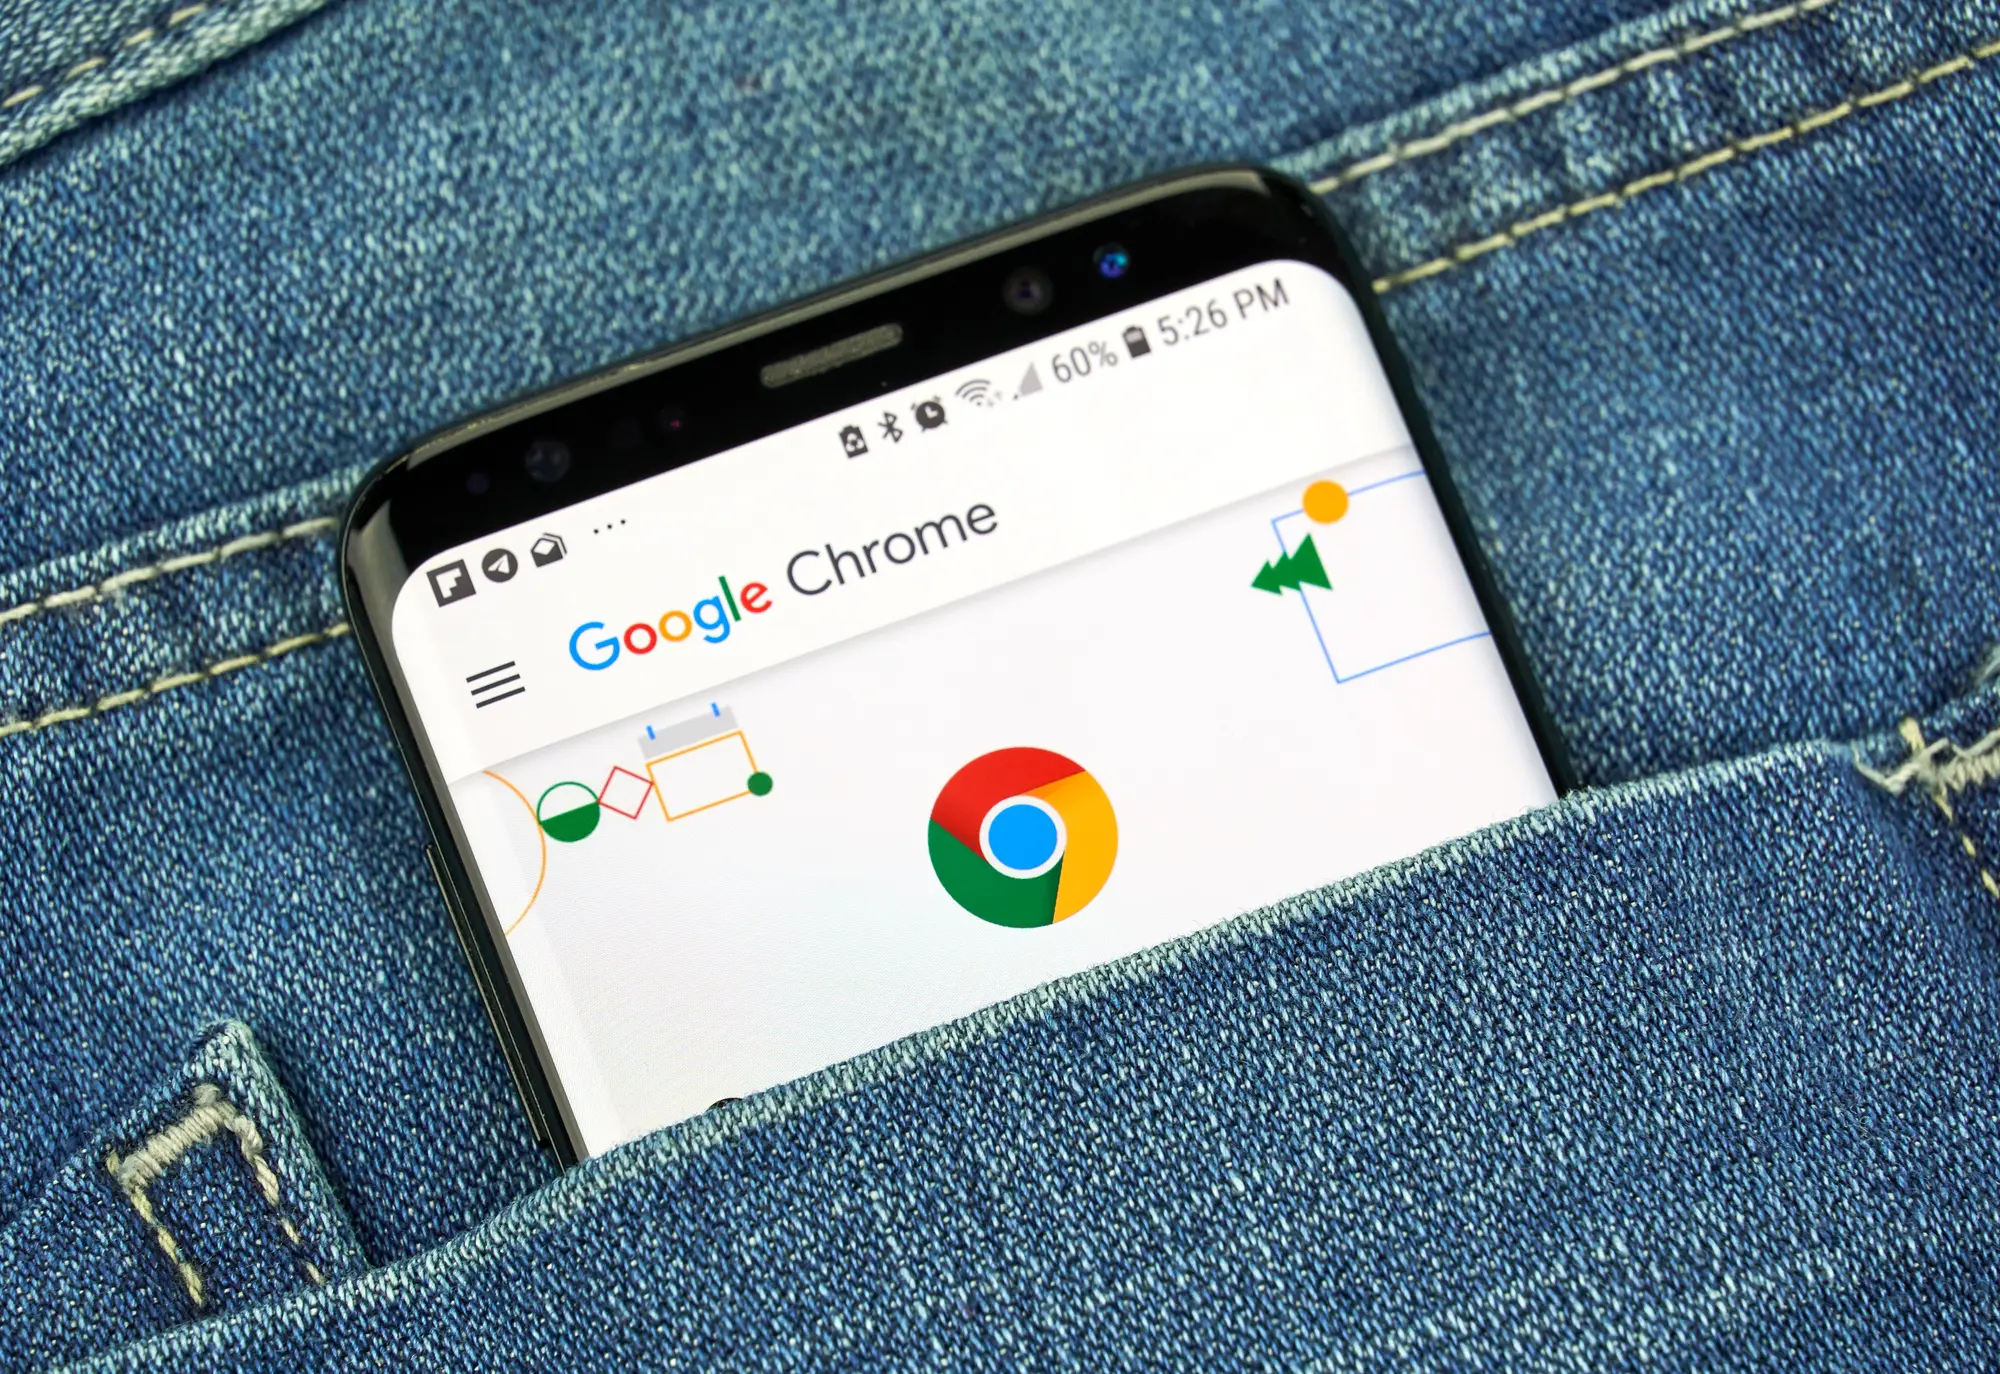 Google Chrome on a phone screen in a pocket